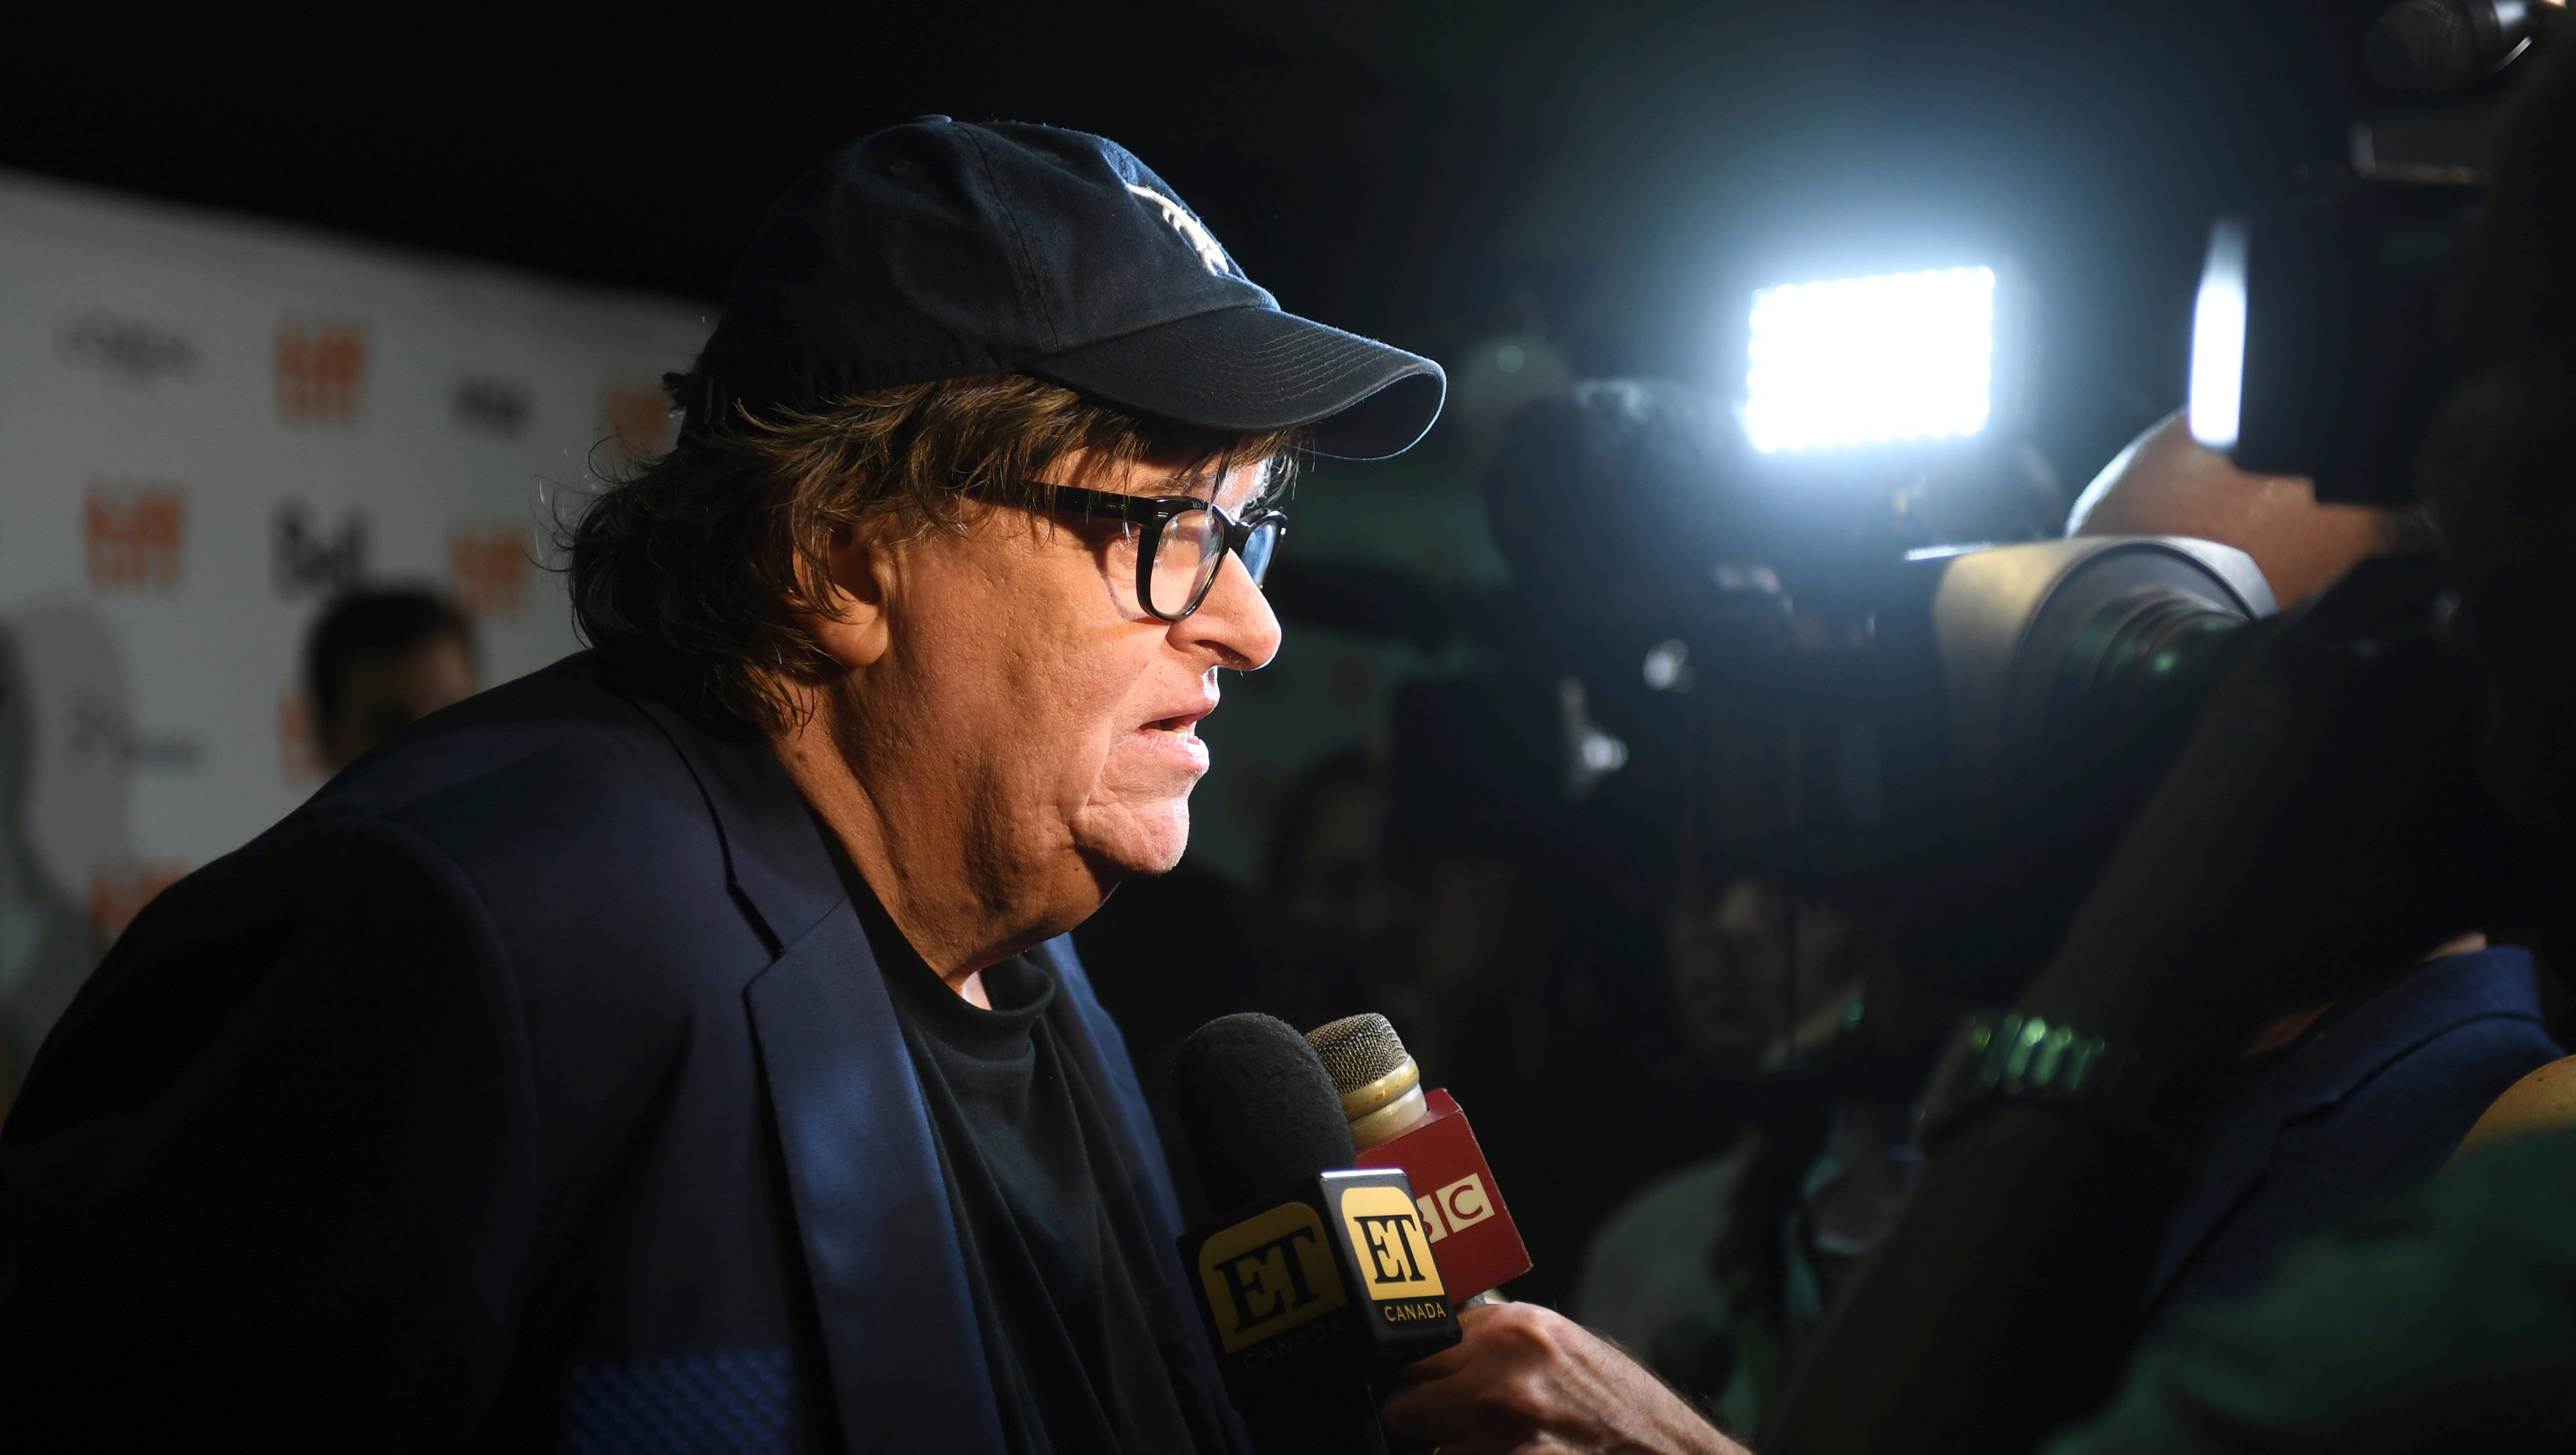 Michael Moore speaks with journalists as he attends the premiere for "Fahrenheit 11/9" on day 1 of the Toronto International Film Festival at the Ryerson Theatre on Thursday, Sept. 6, 2018, in Toronto.